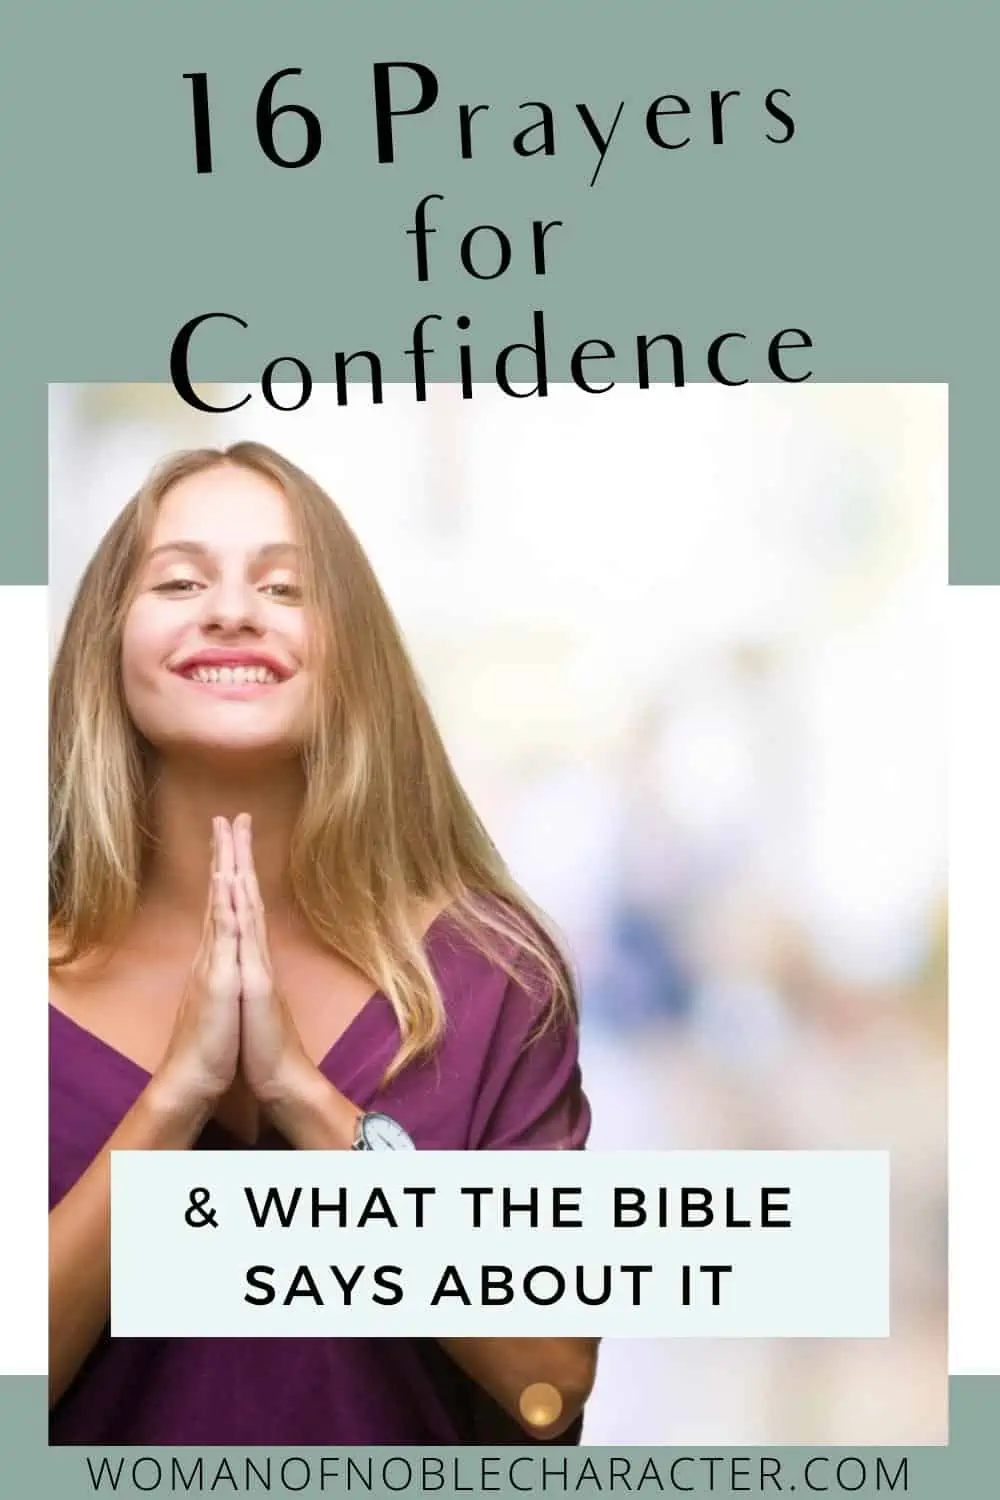 image of woman praying with the text 16 prayers for confidence and what the Bible says about it